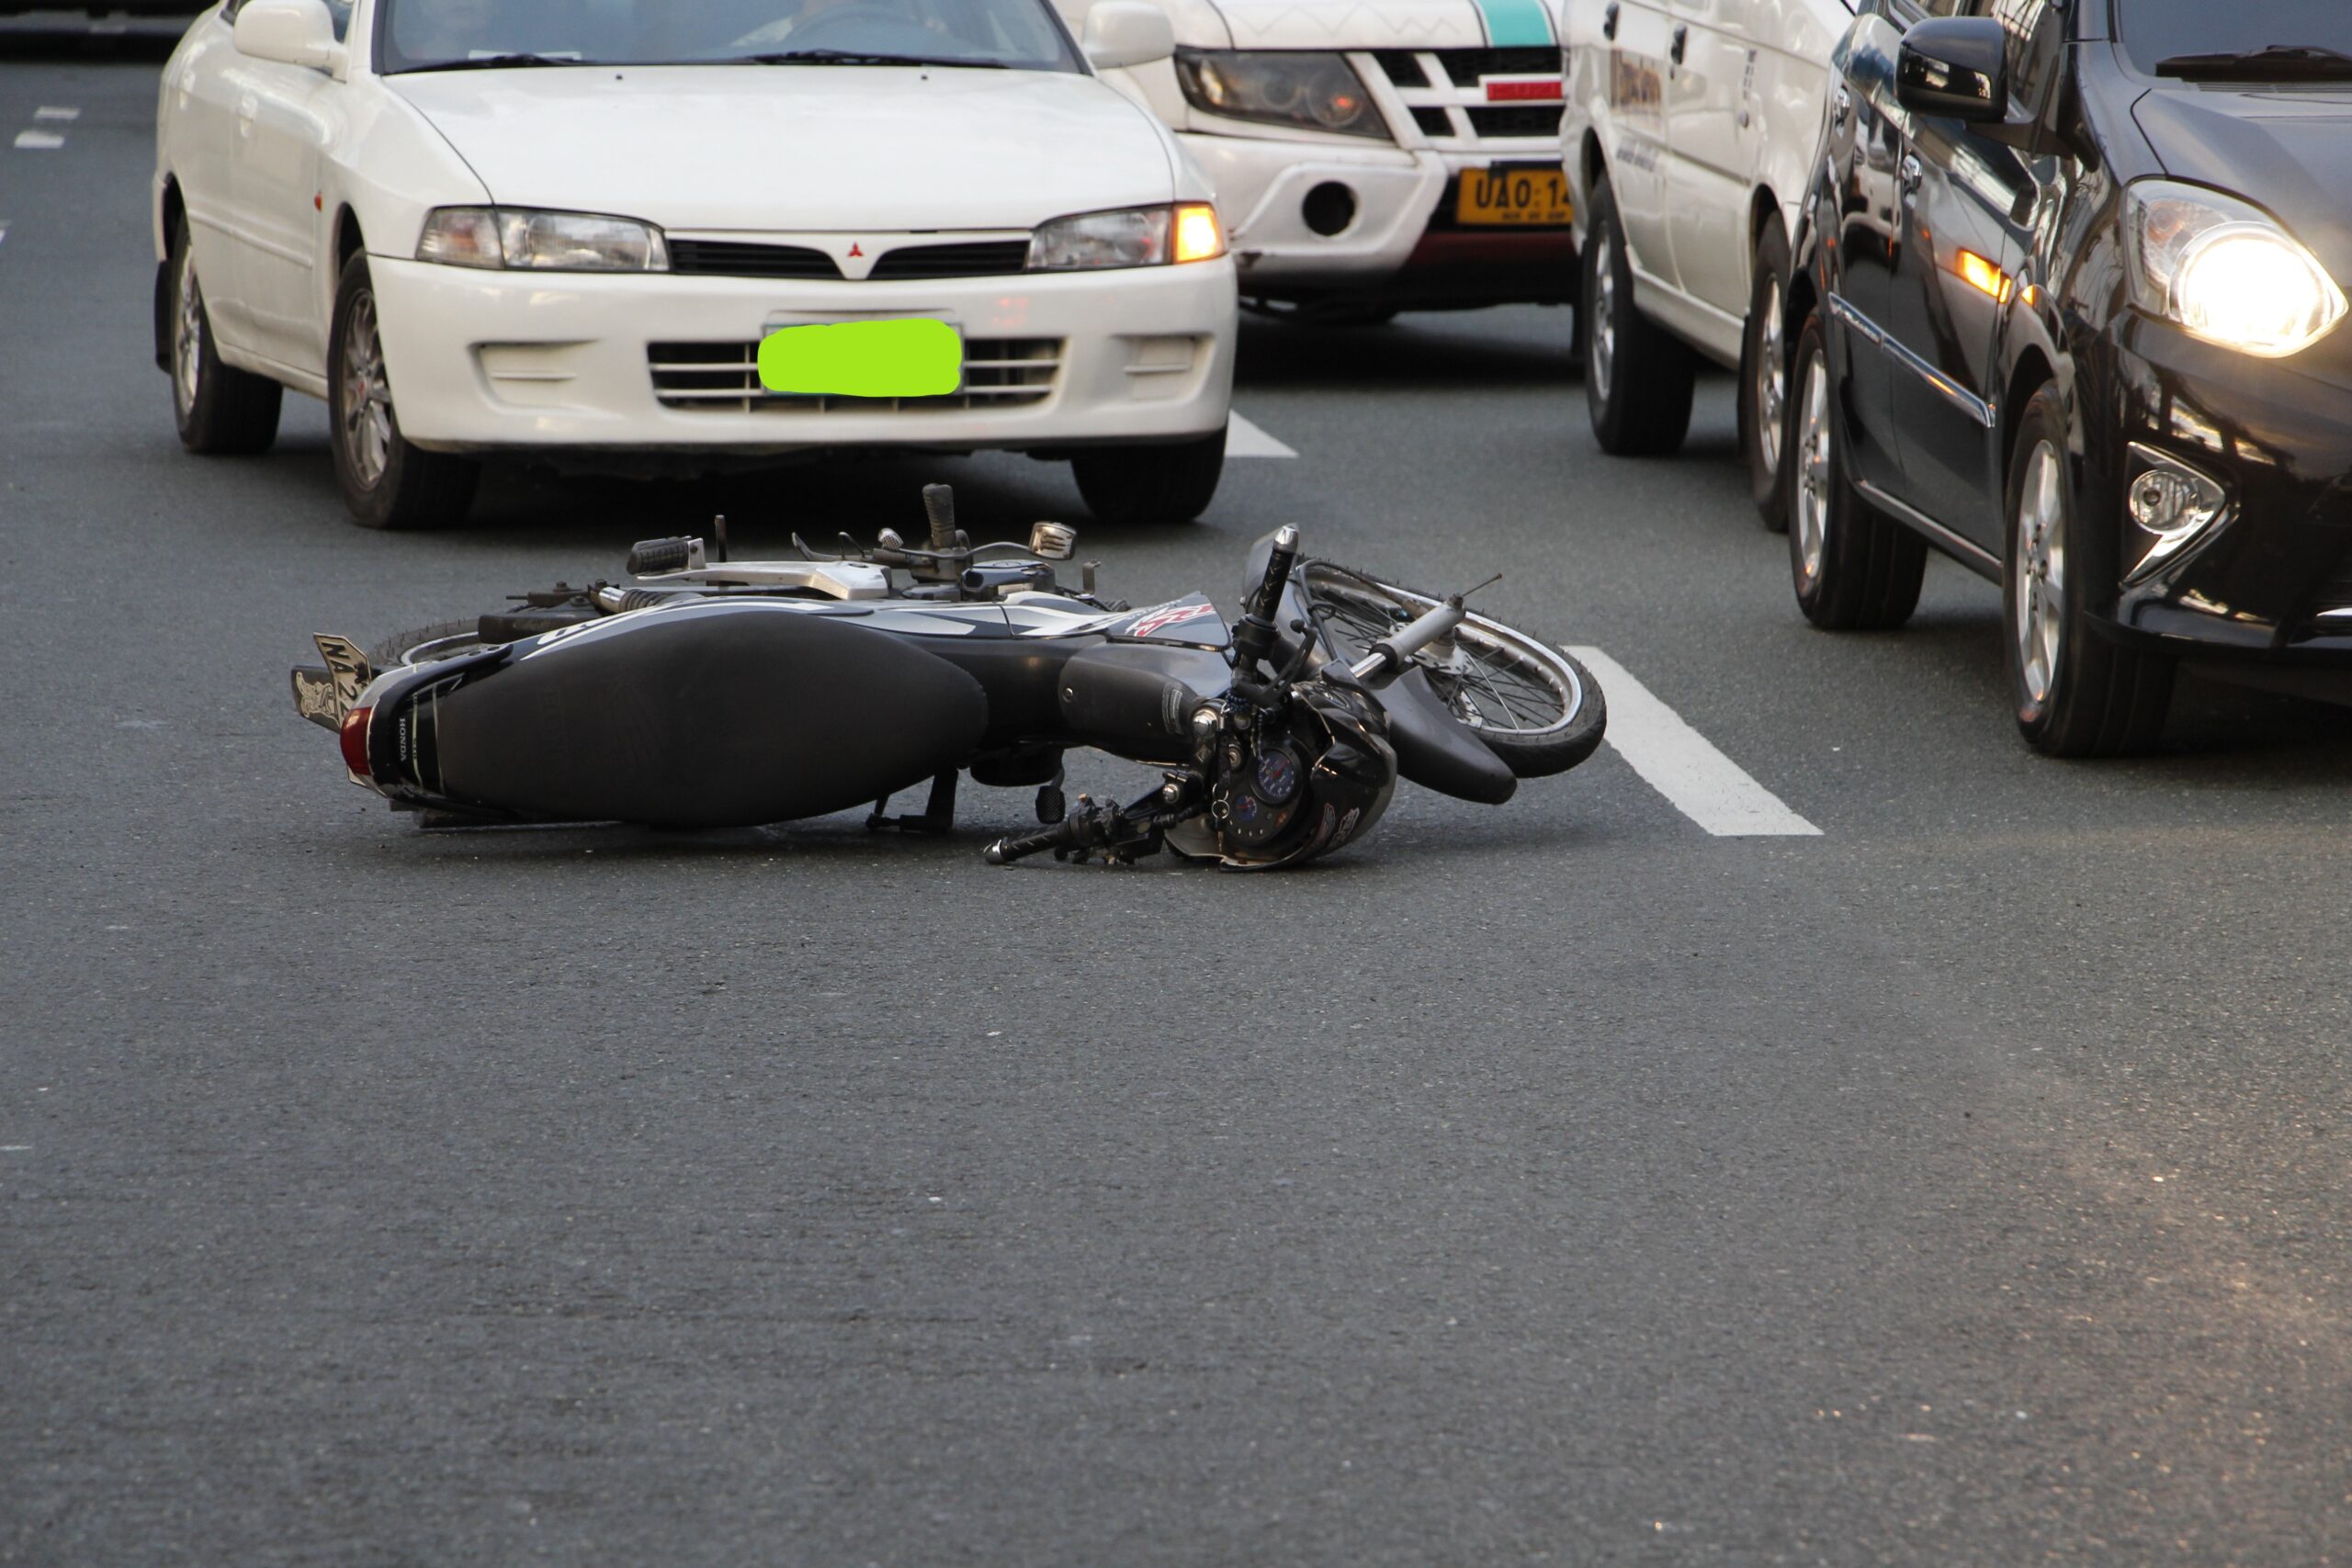 WHAT MAKES COLORADO MOTORCYCLE ACCIDENT CASES COMPLICATED